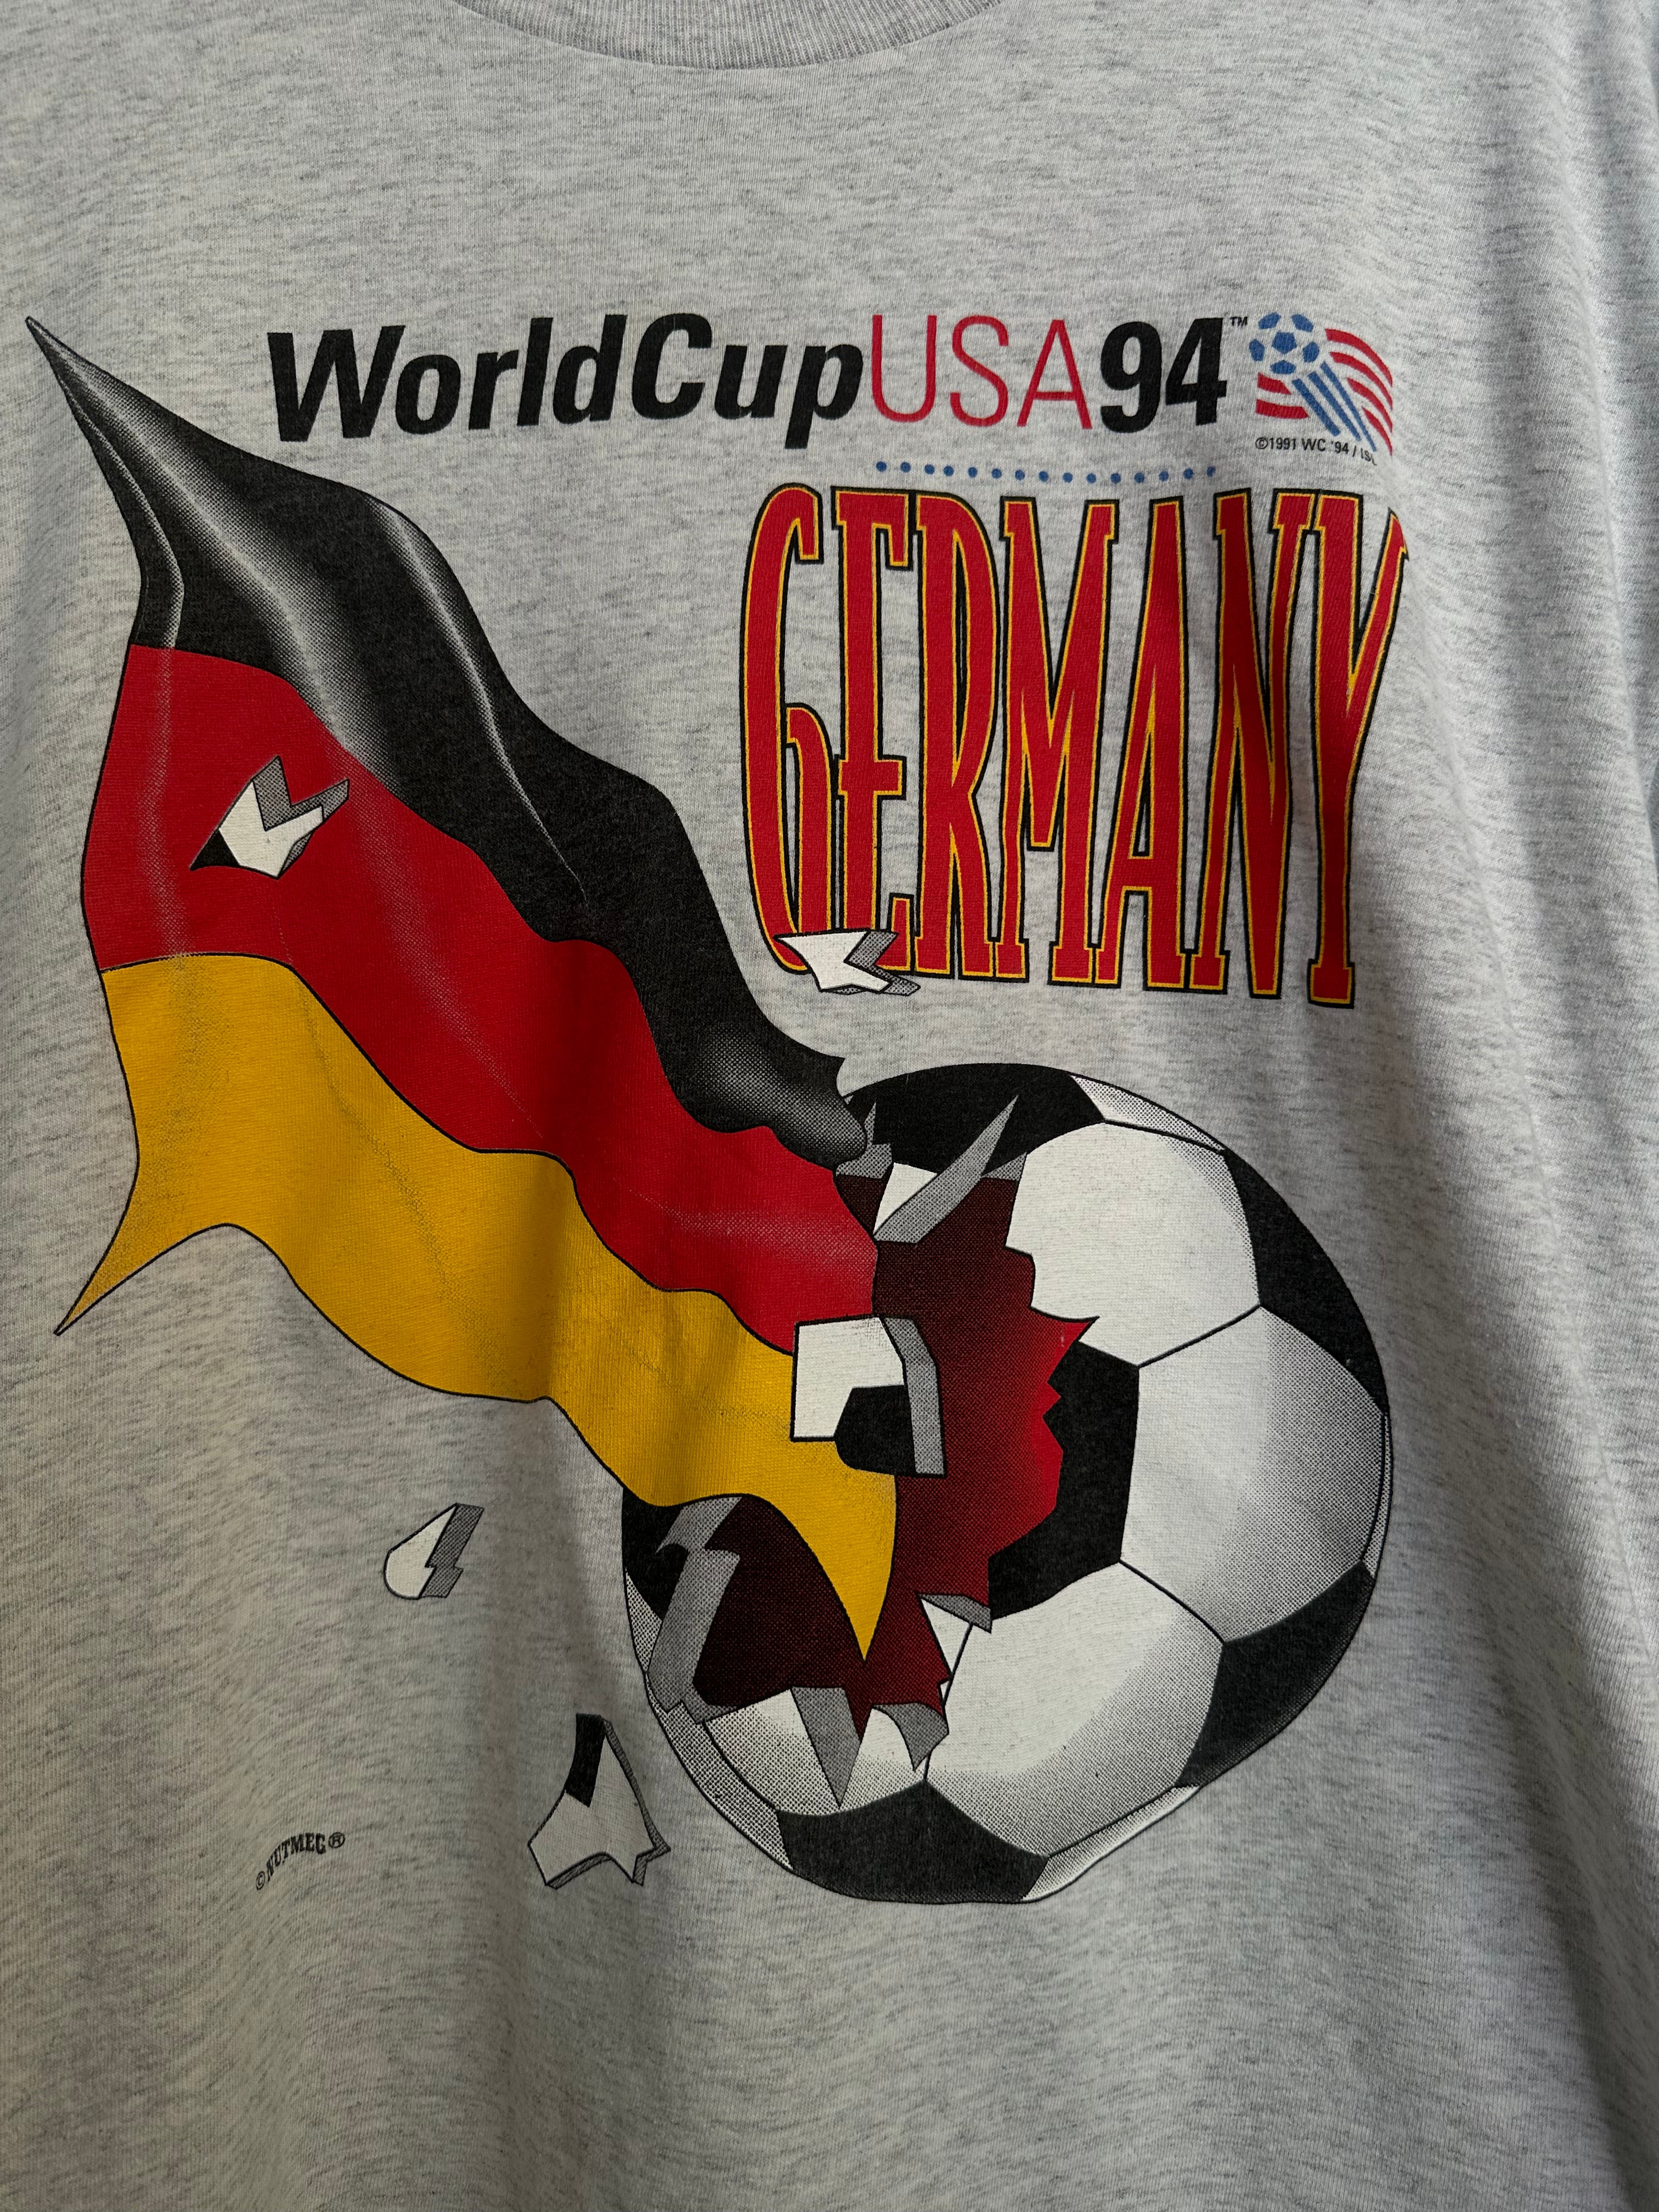 Vintage T-shirt from the Football World Cup 1994